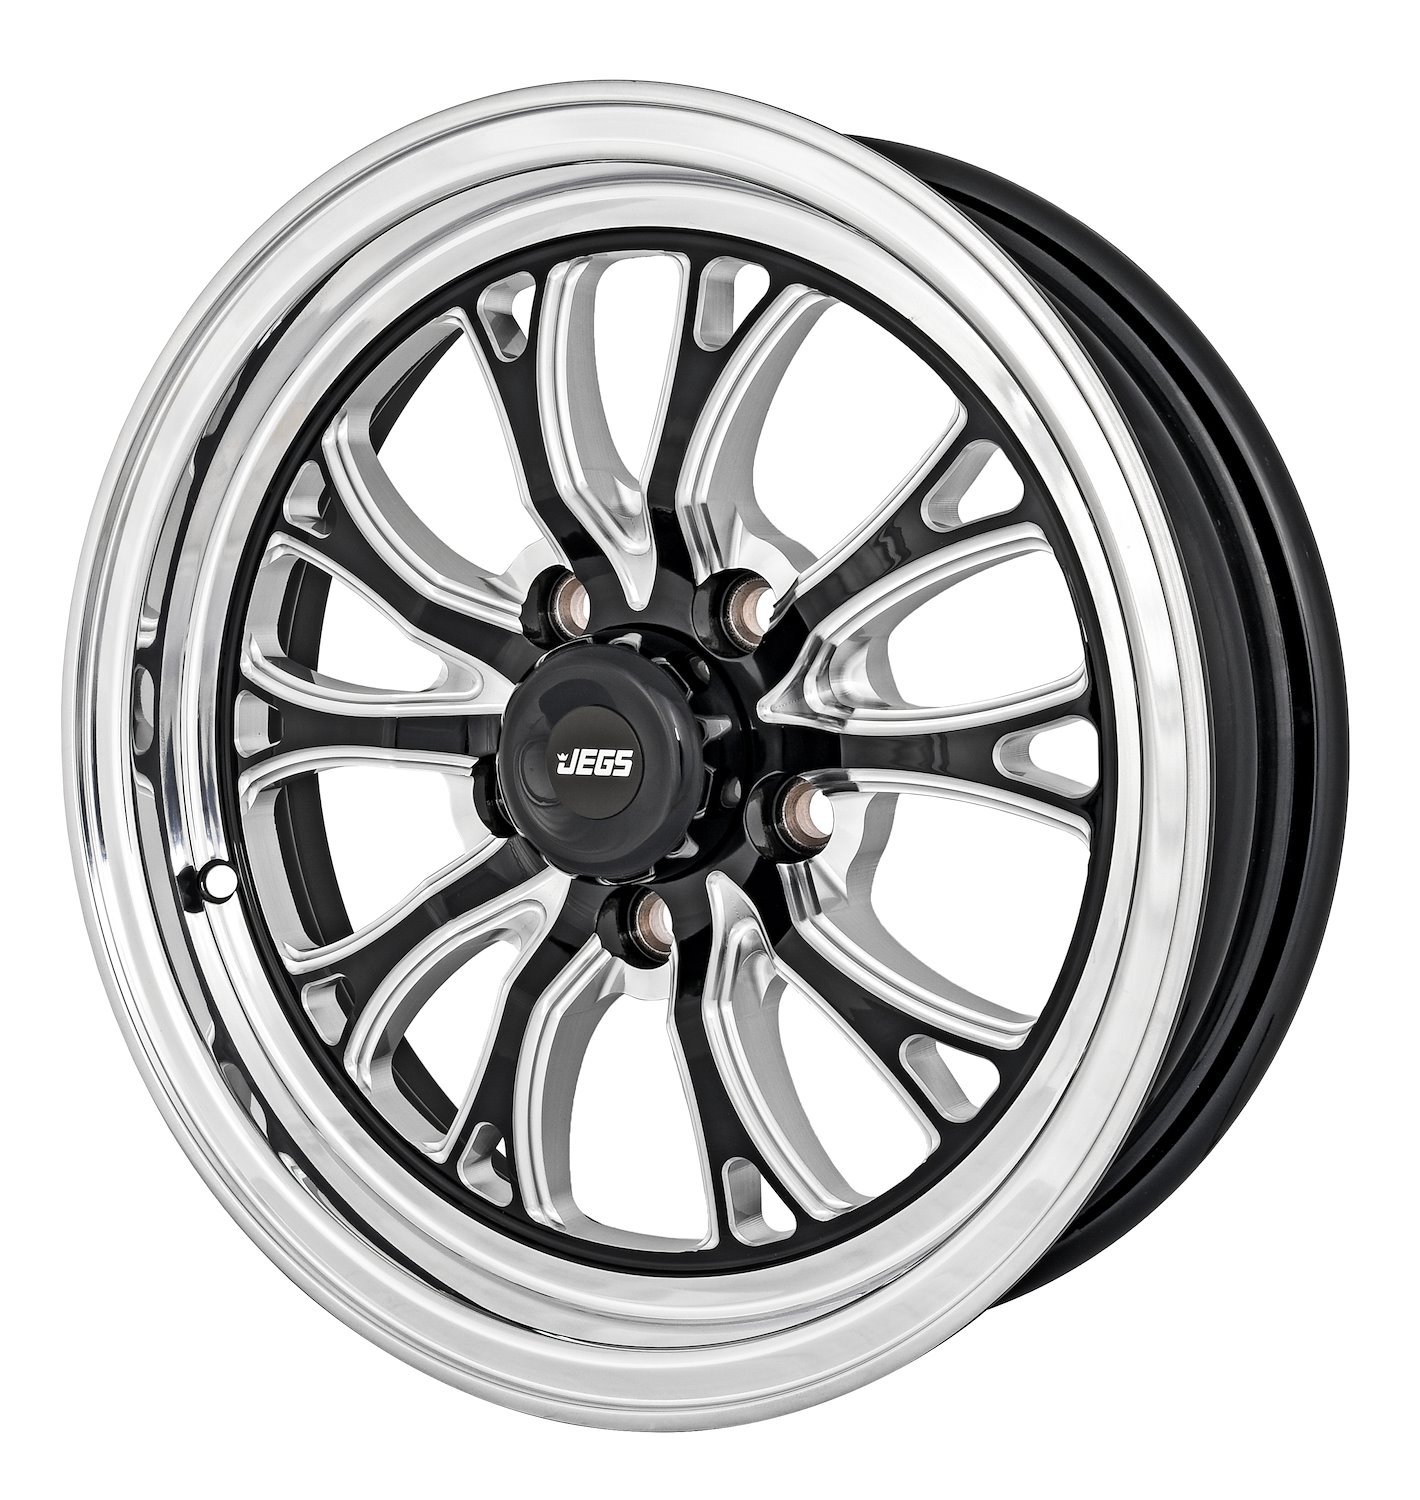 JEGS 555-681371: SSR Spike Wheel | Size: 15" x 4" | Bolt Pattern: 5 x 4.75"  | Back Spacing: 1.75" | Offset: -19 mm | Center Bore: 3.27" | Load Rating:  1900 lbs. | Finish: Polished Outer Lip with Black Milled Spokes | Compare  to 555-681405 - JEGS